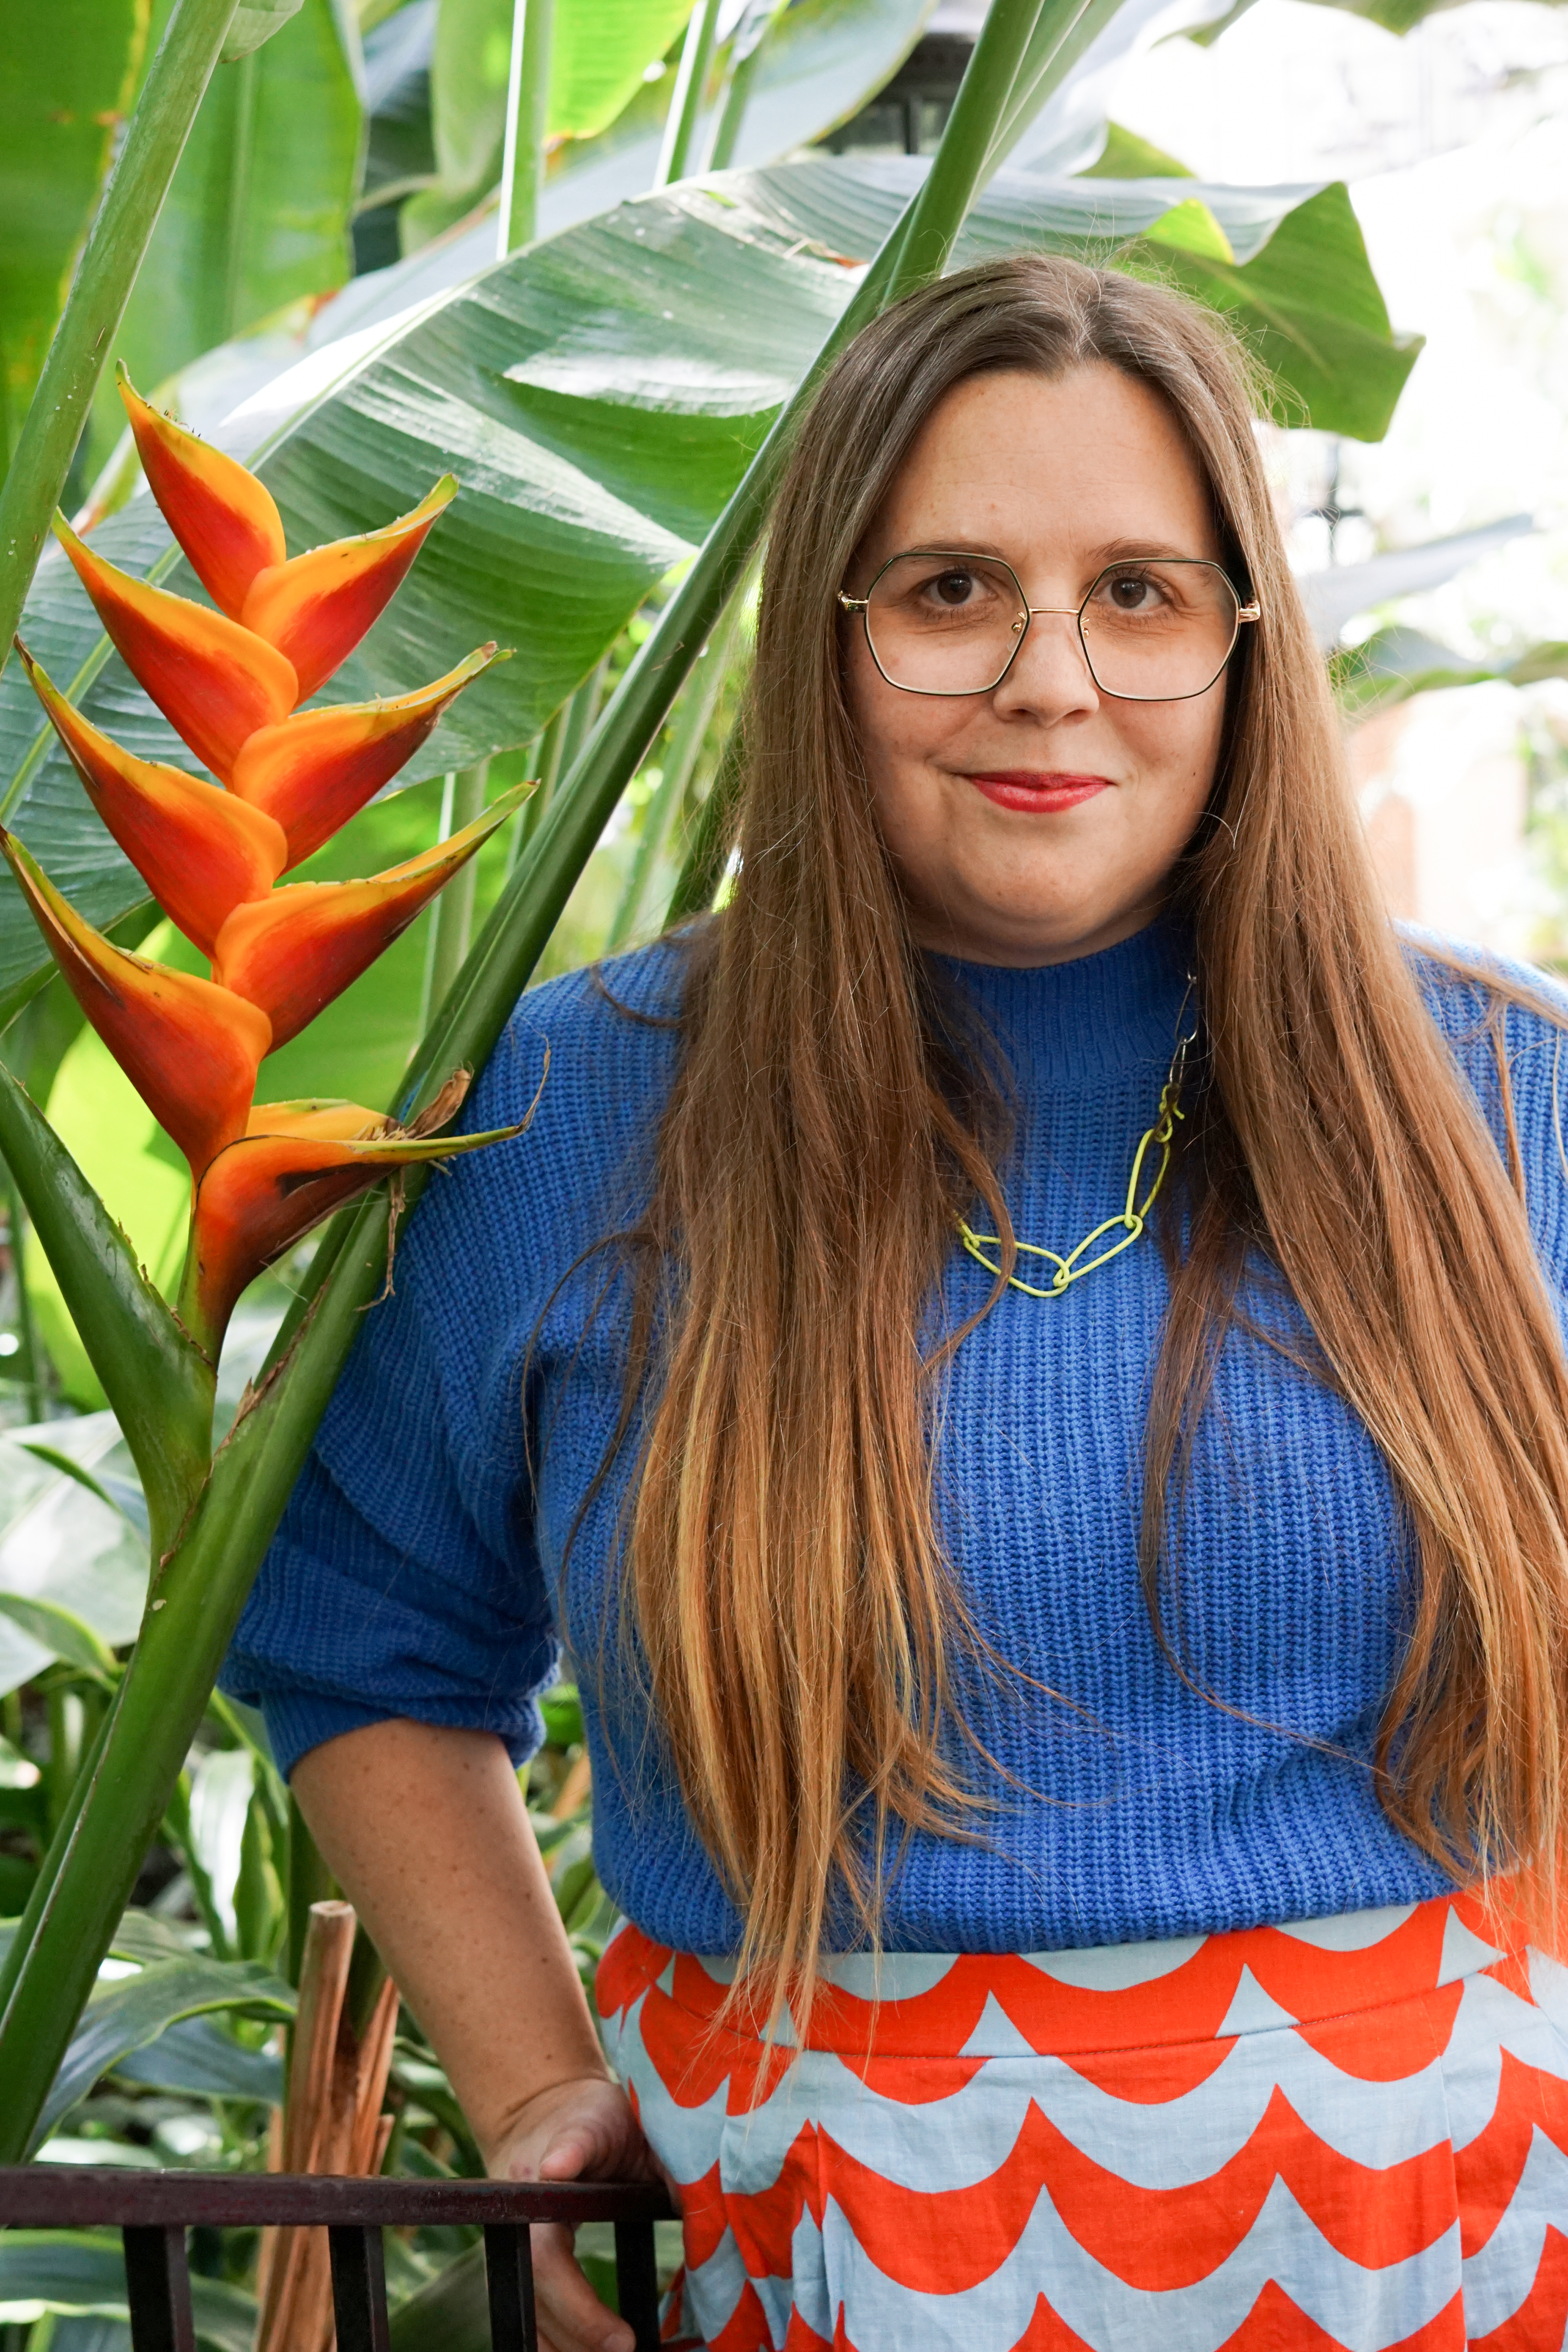 self-portrait in garden with bird of paradise plant, neon necklace, blue sweater, and marimekko skirt